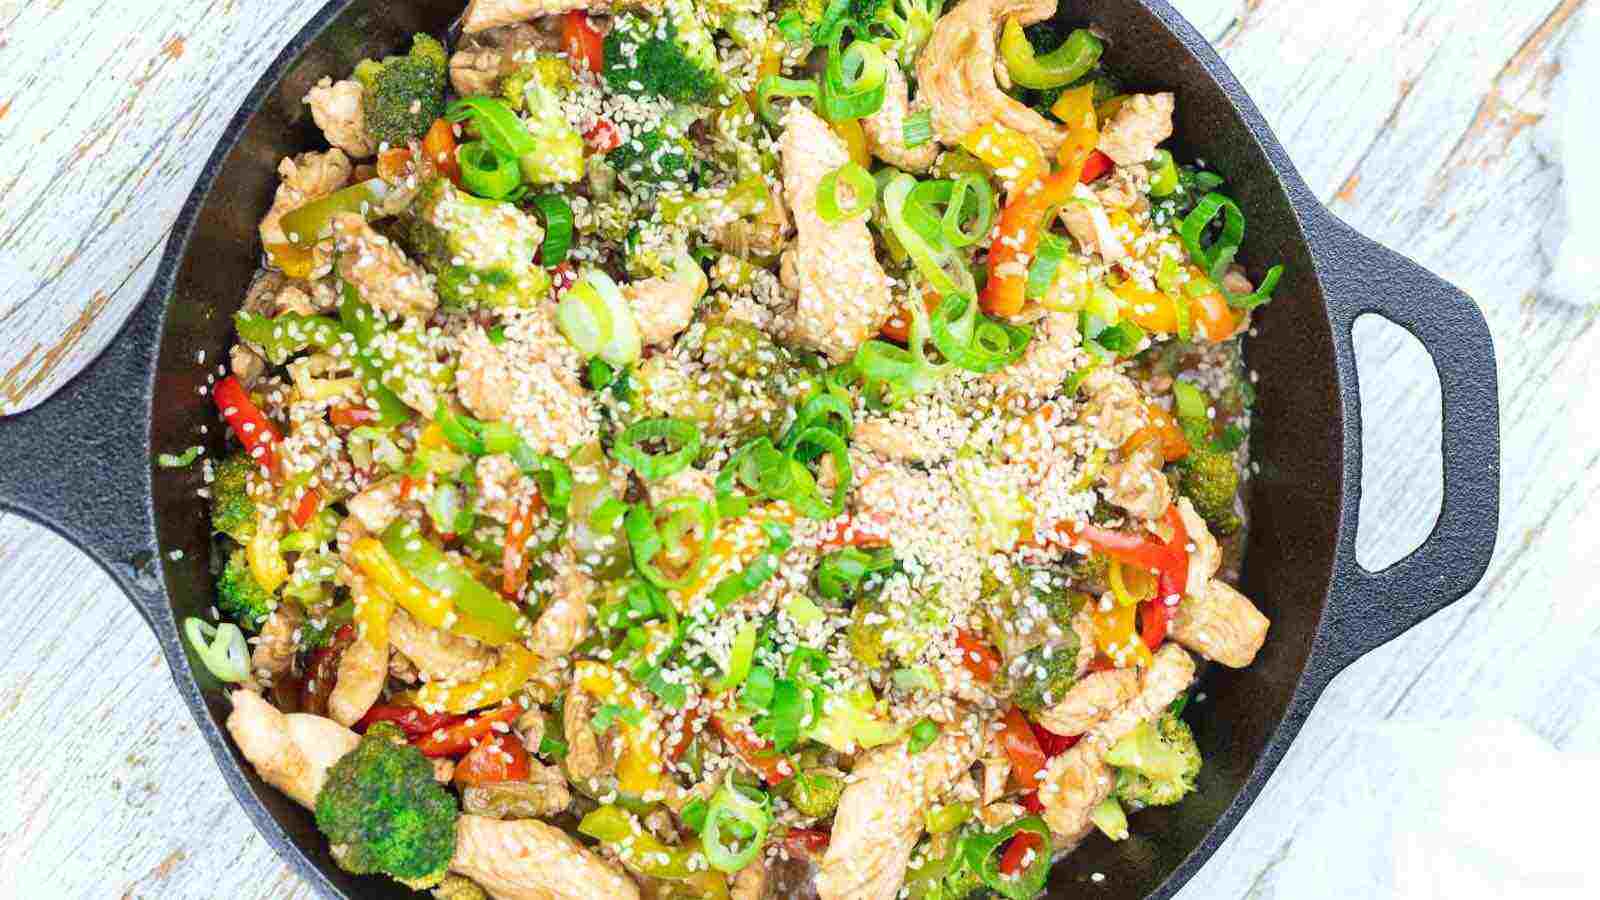 A skillet with vegetables and chicken in it.